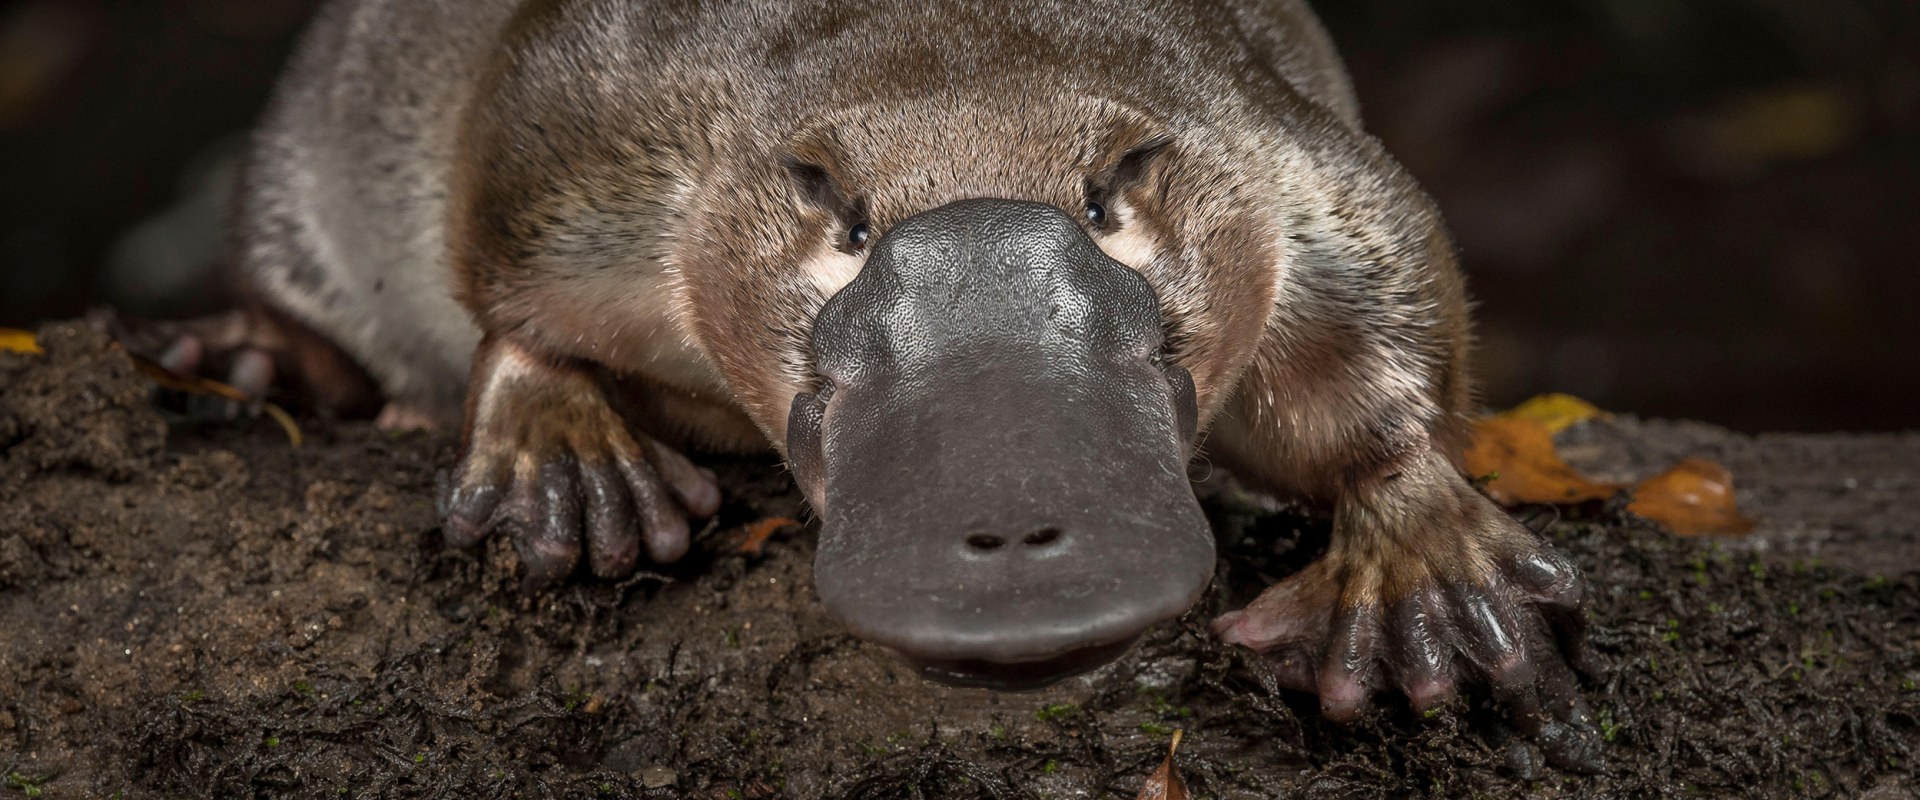 Discover the Fascinating World of the Platypus